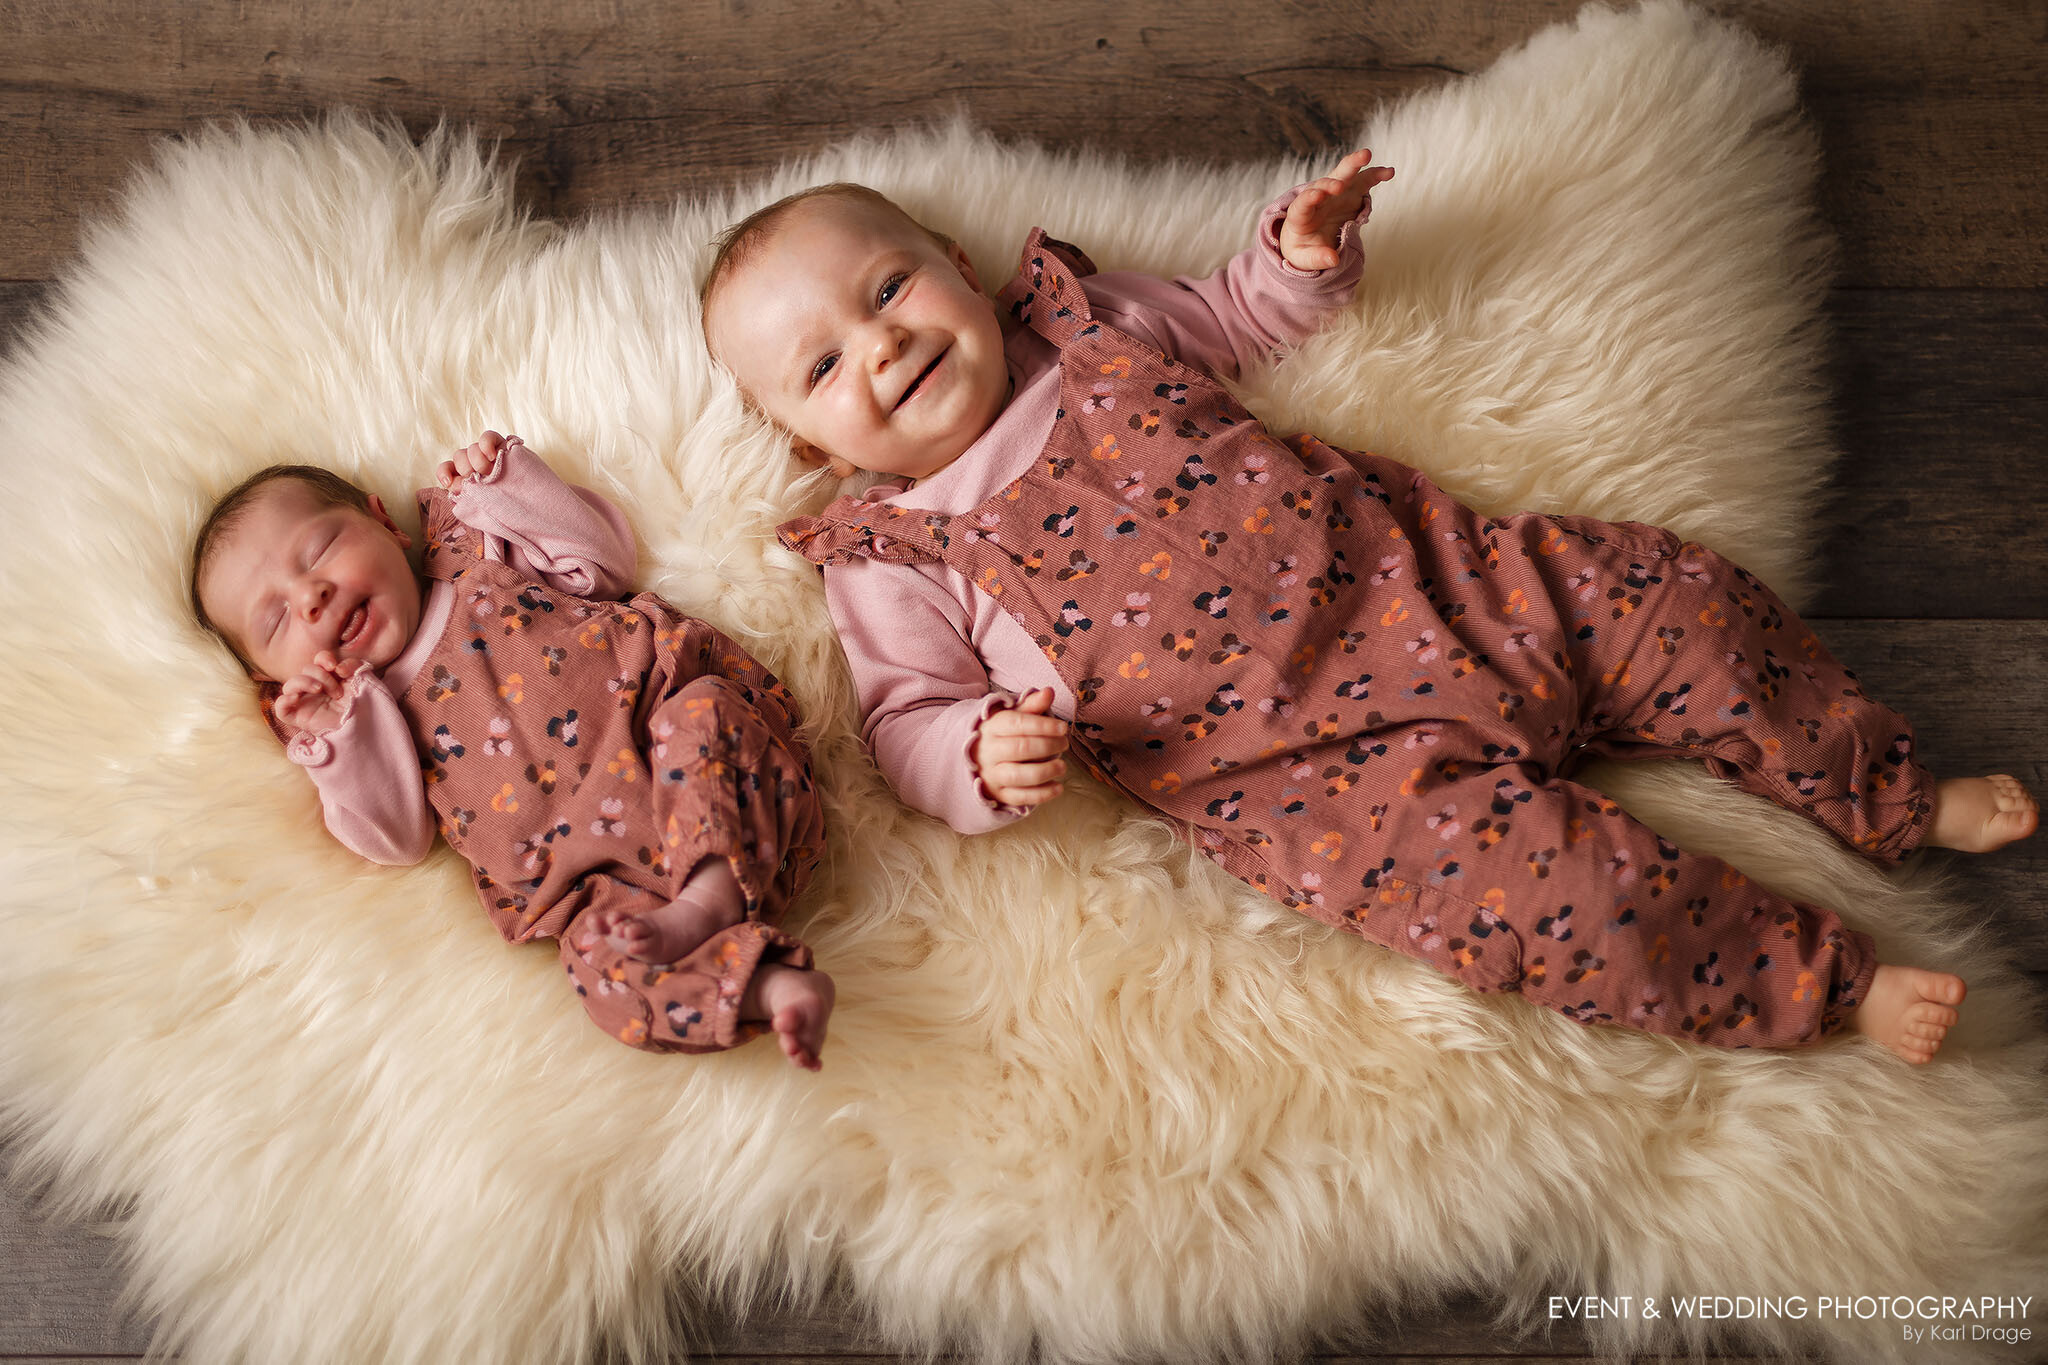 A newborn baby girl and her big sister lay on a sheepskin rug during the newborn's first photo shoot.